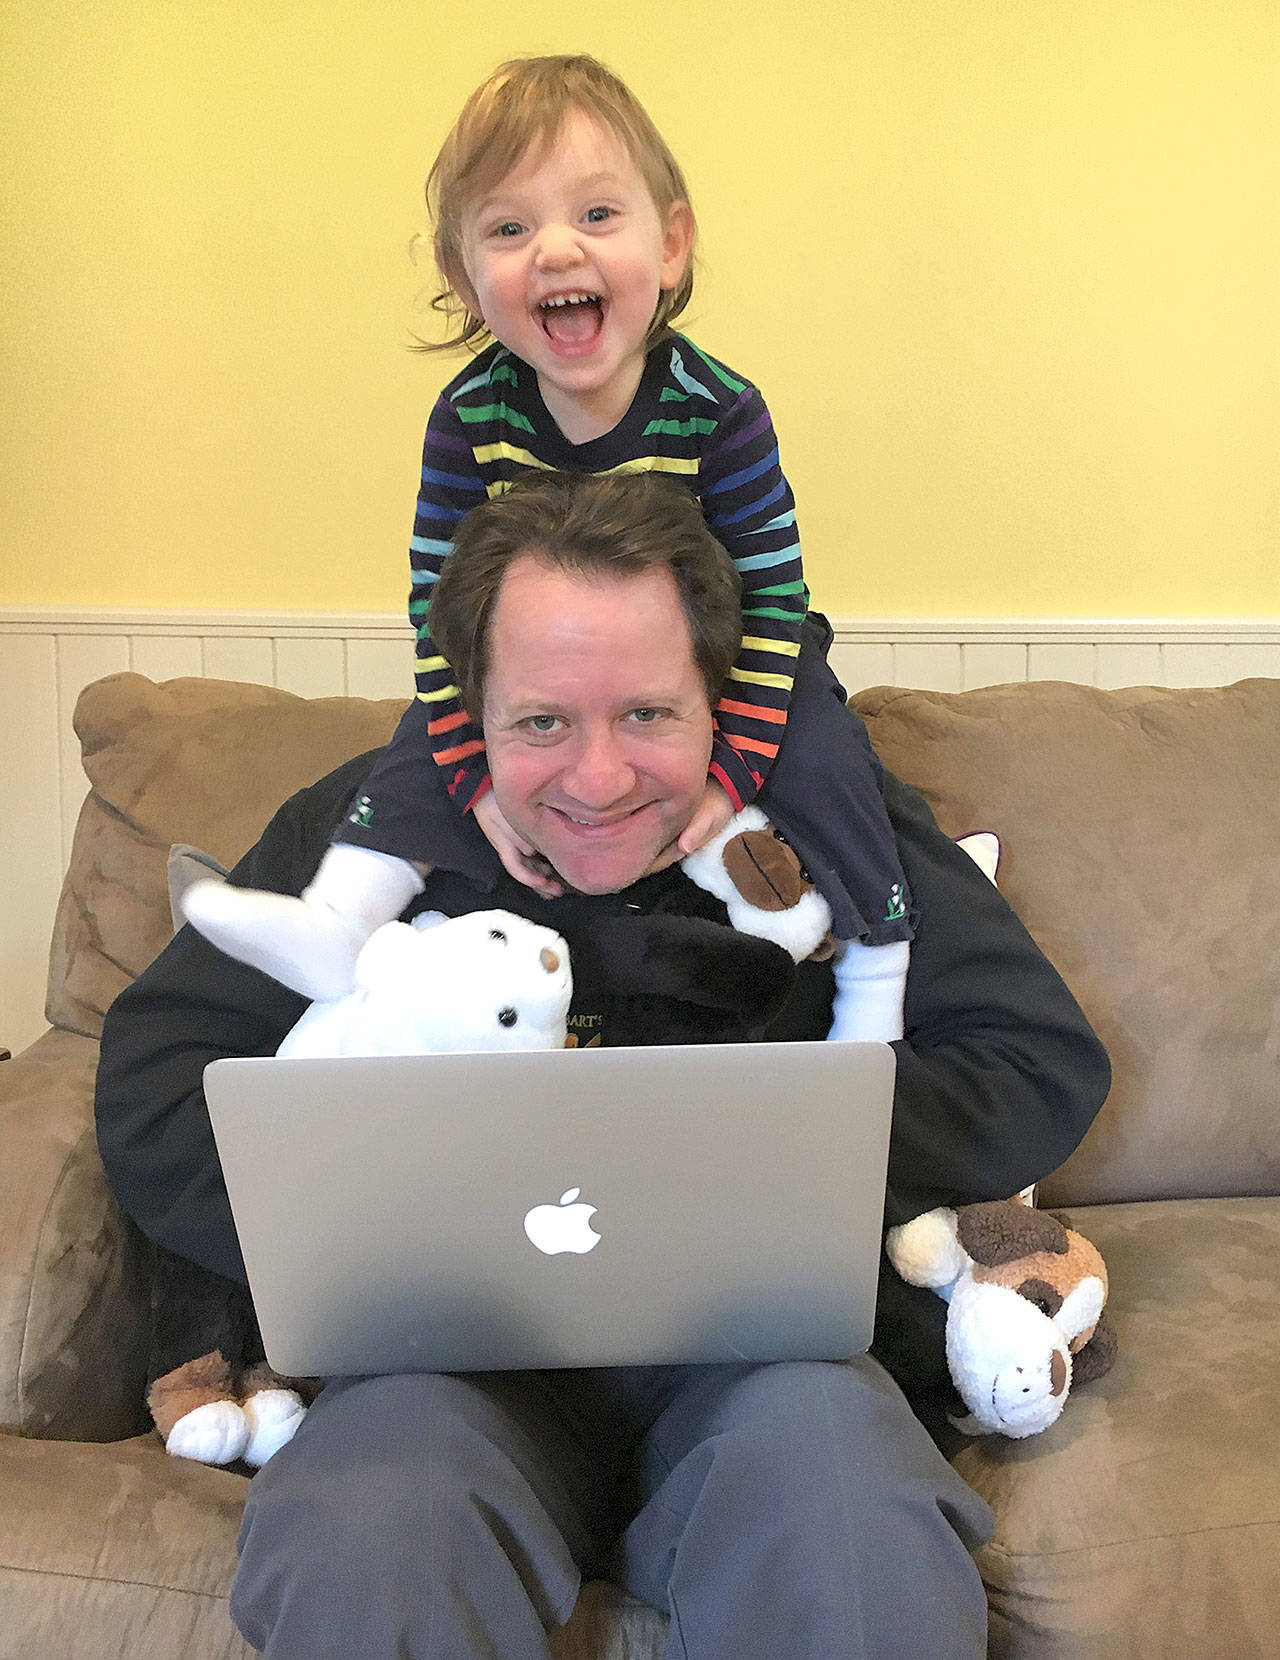 Andrew Gaines of Grays Harbor College has his hands full working from home with his 2-year-old daughter, Shayna. (Photo by Michelle Gaines)